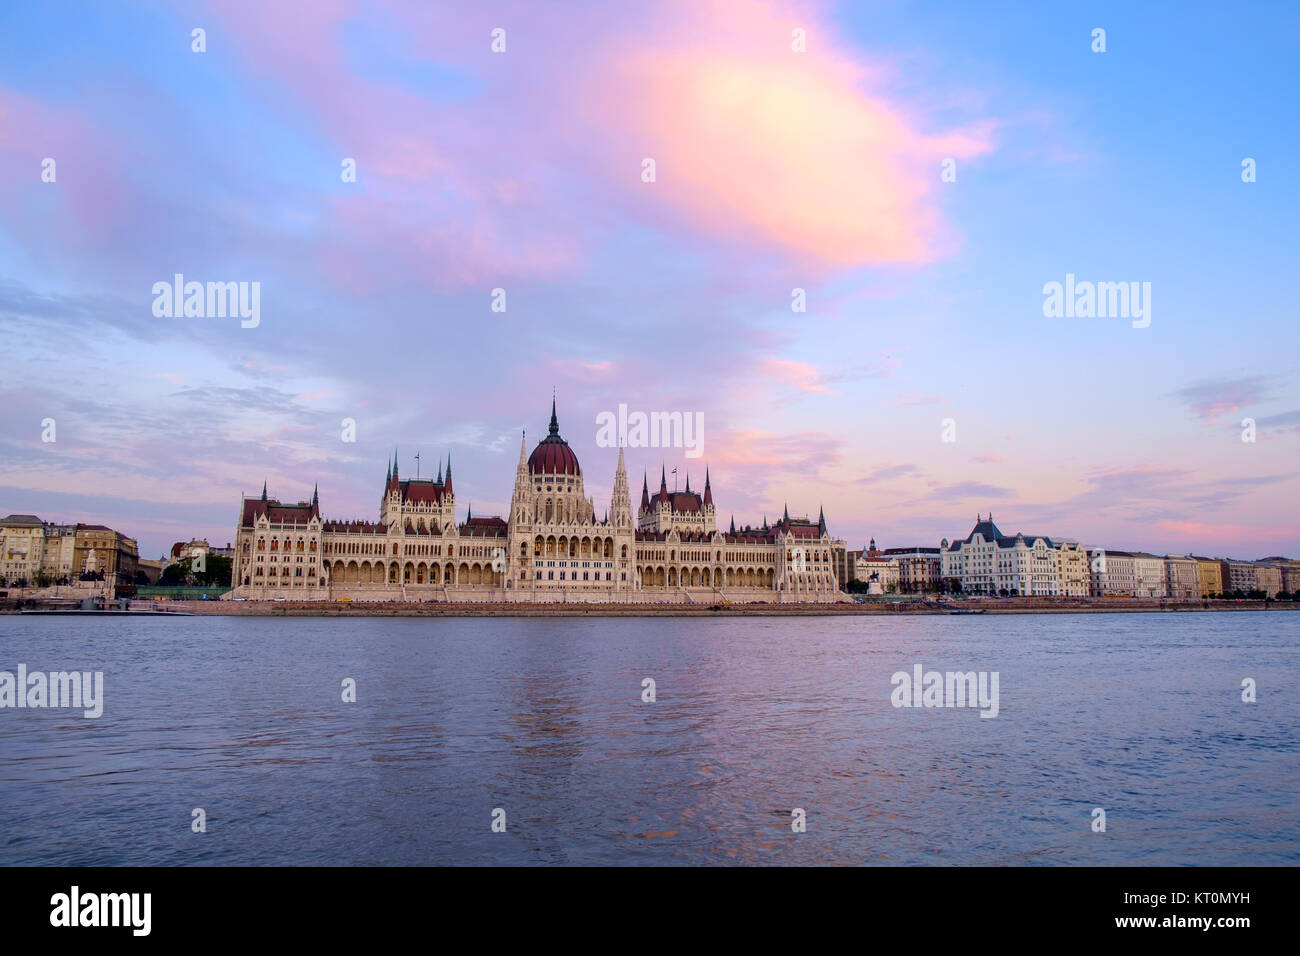 The Hungarian Parliament building at sunset Stock Photo